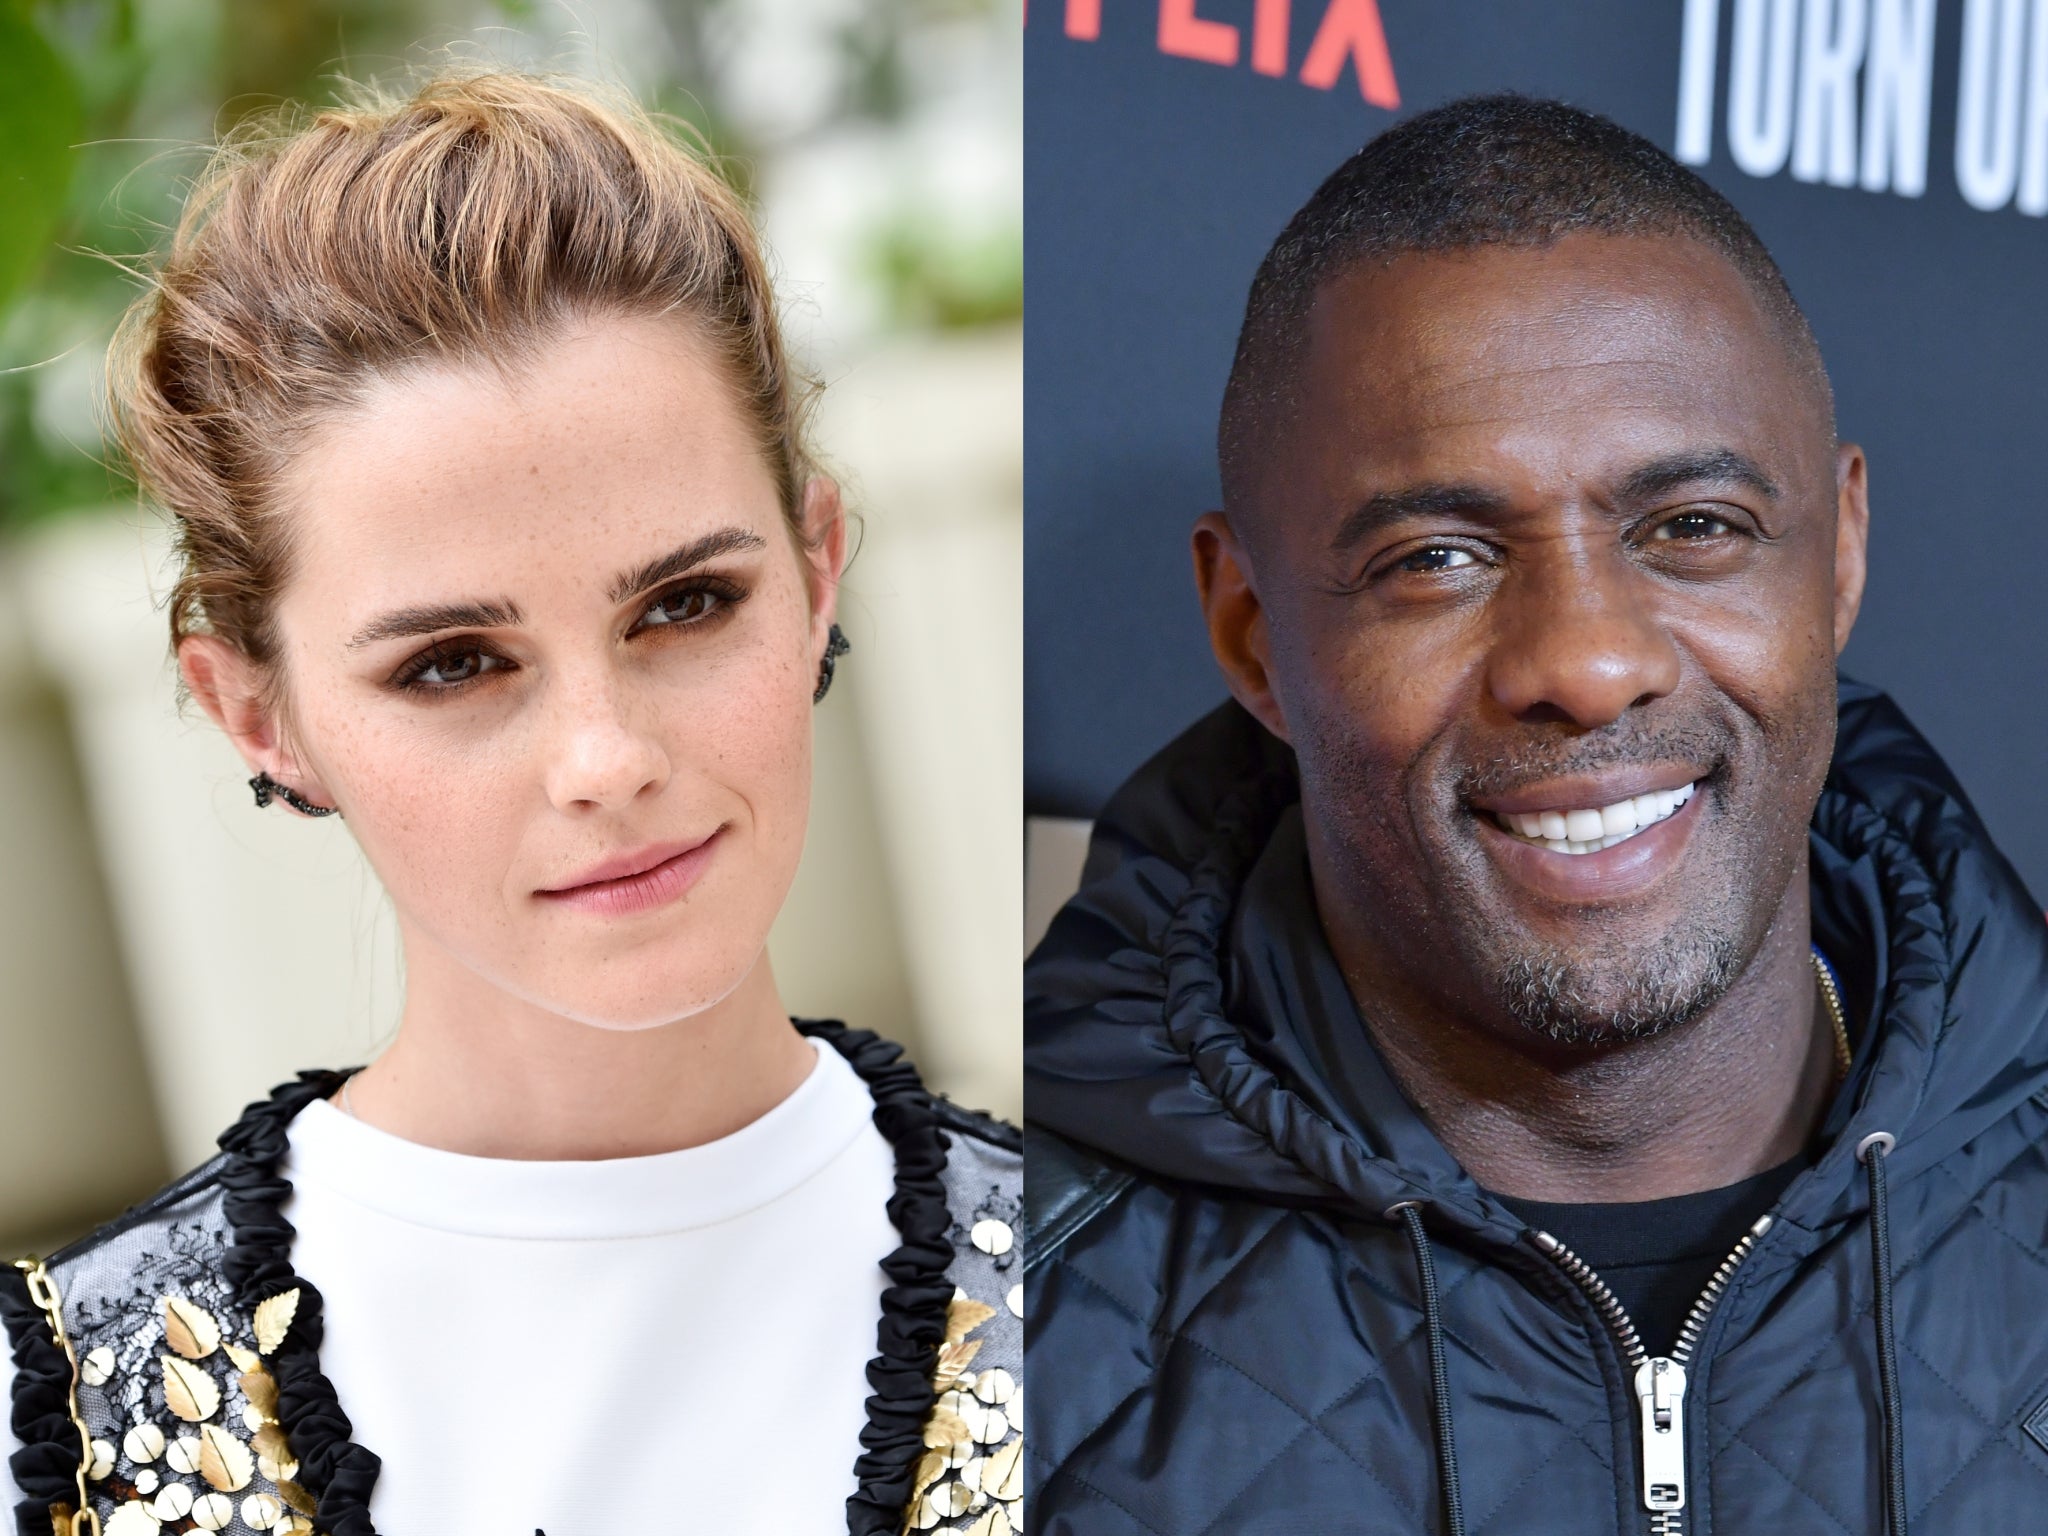 Emma Watson and Idris Elba among 2,000 supporters of letter urging leaders to 'tackle emergency facing people and planet'